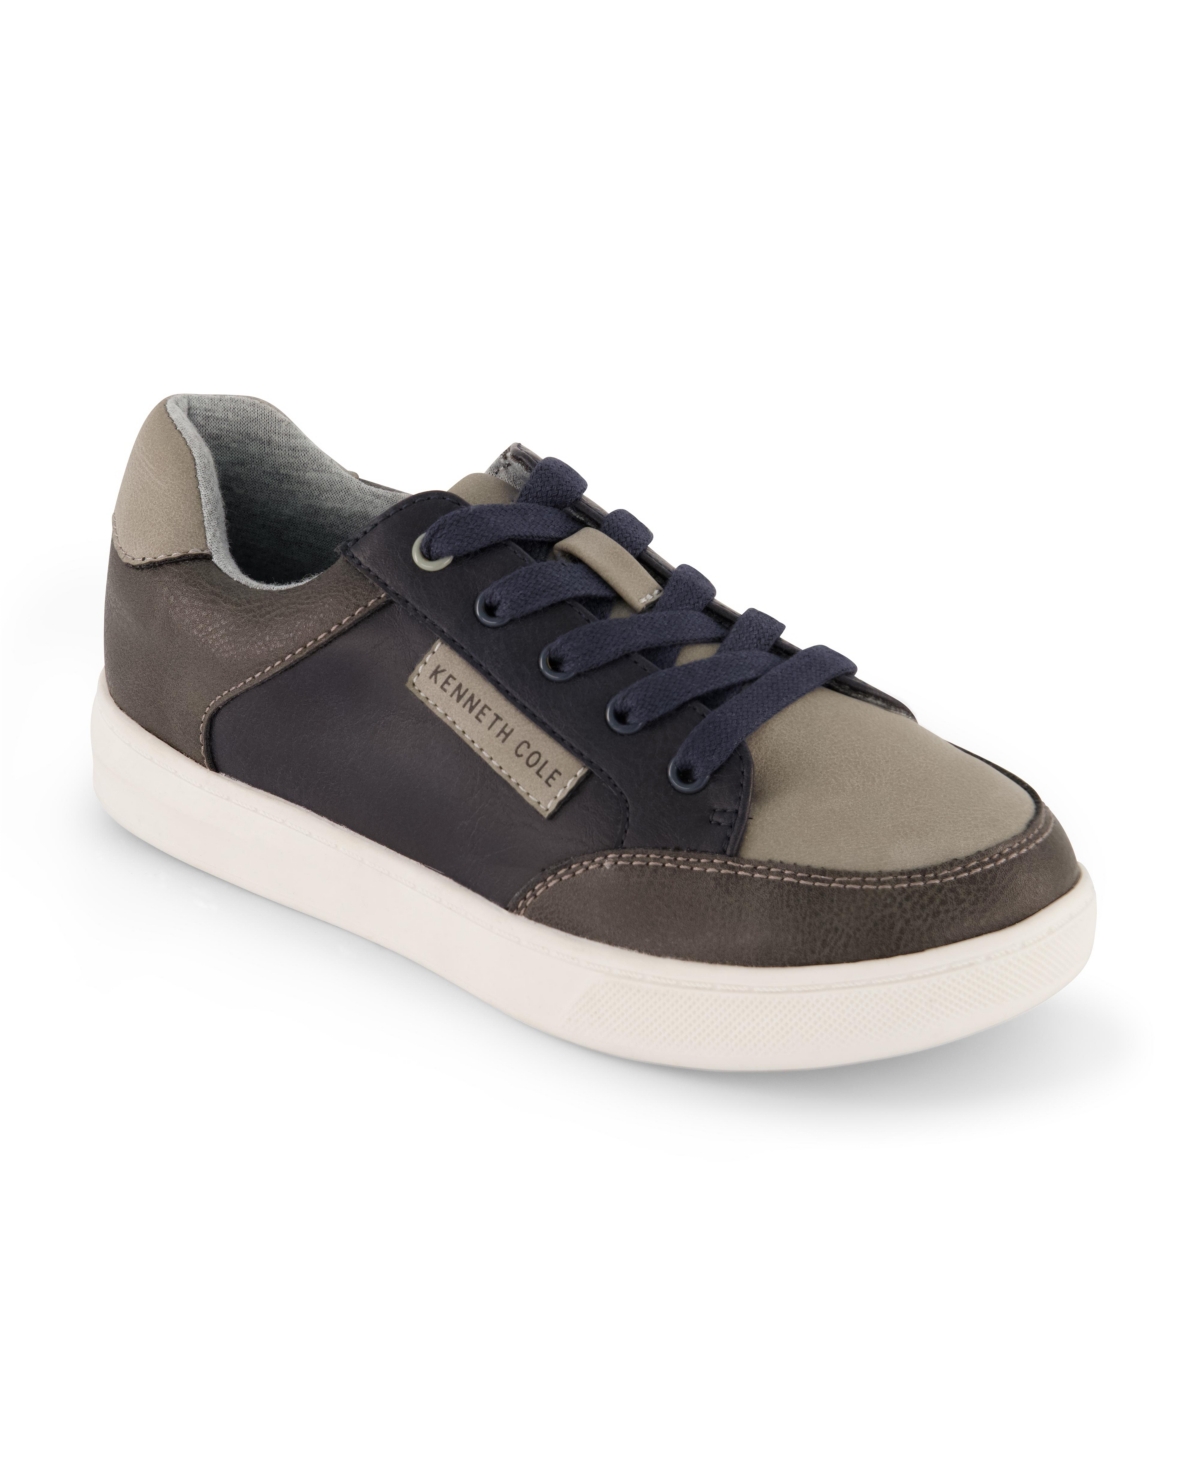 Kenneth Cole New York Mens The Run Lace Up Fashion Casual and